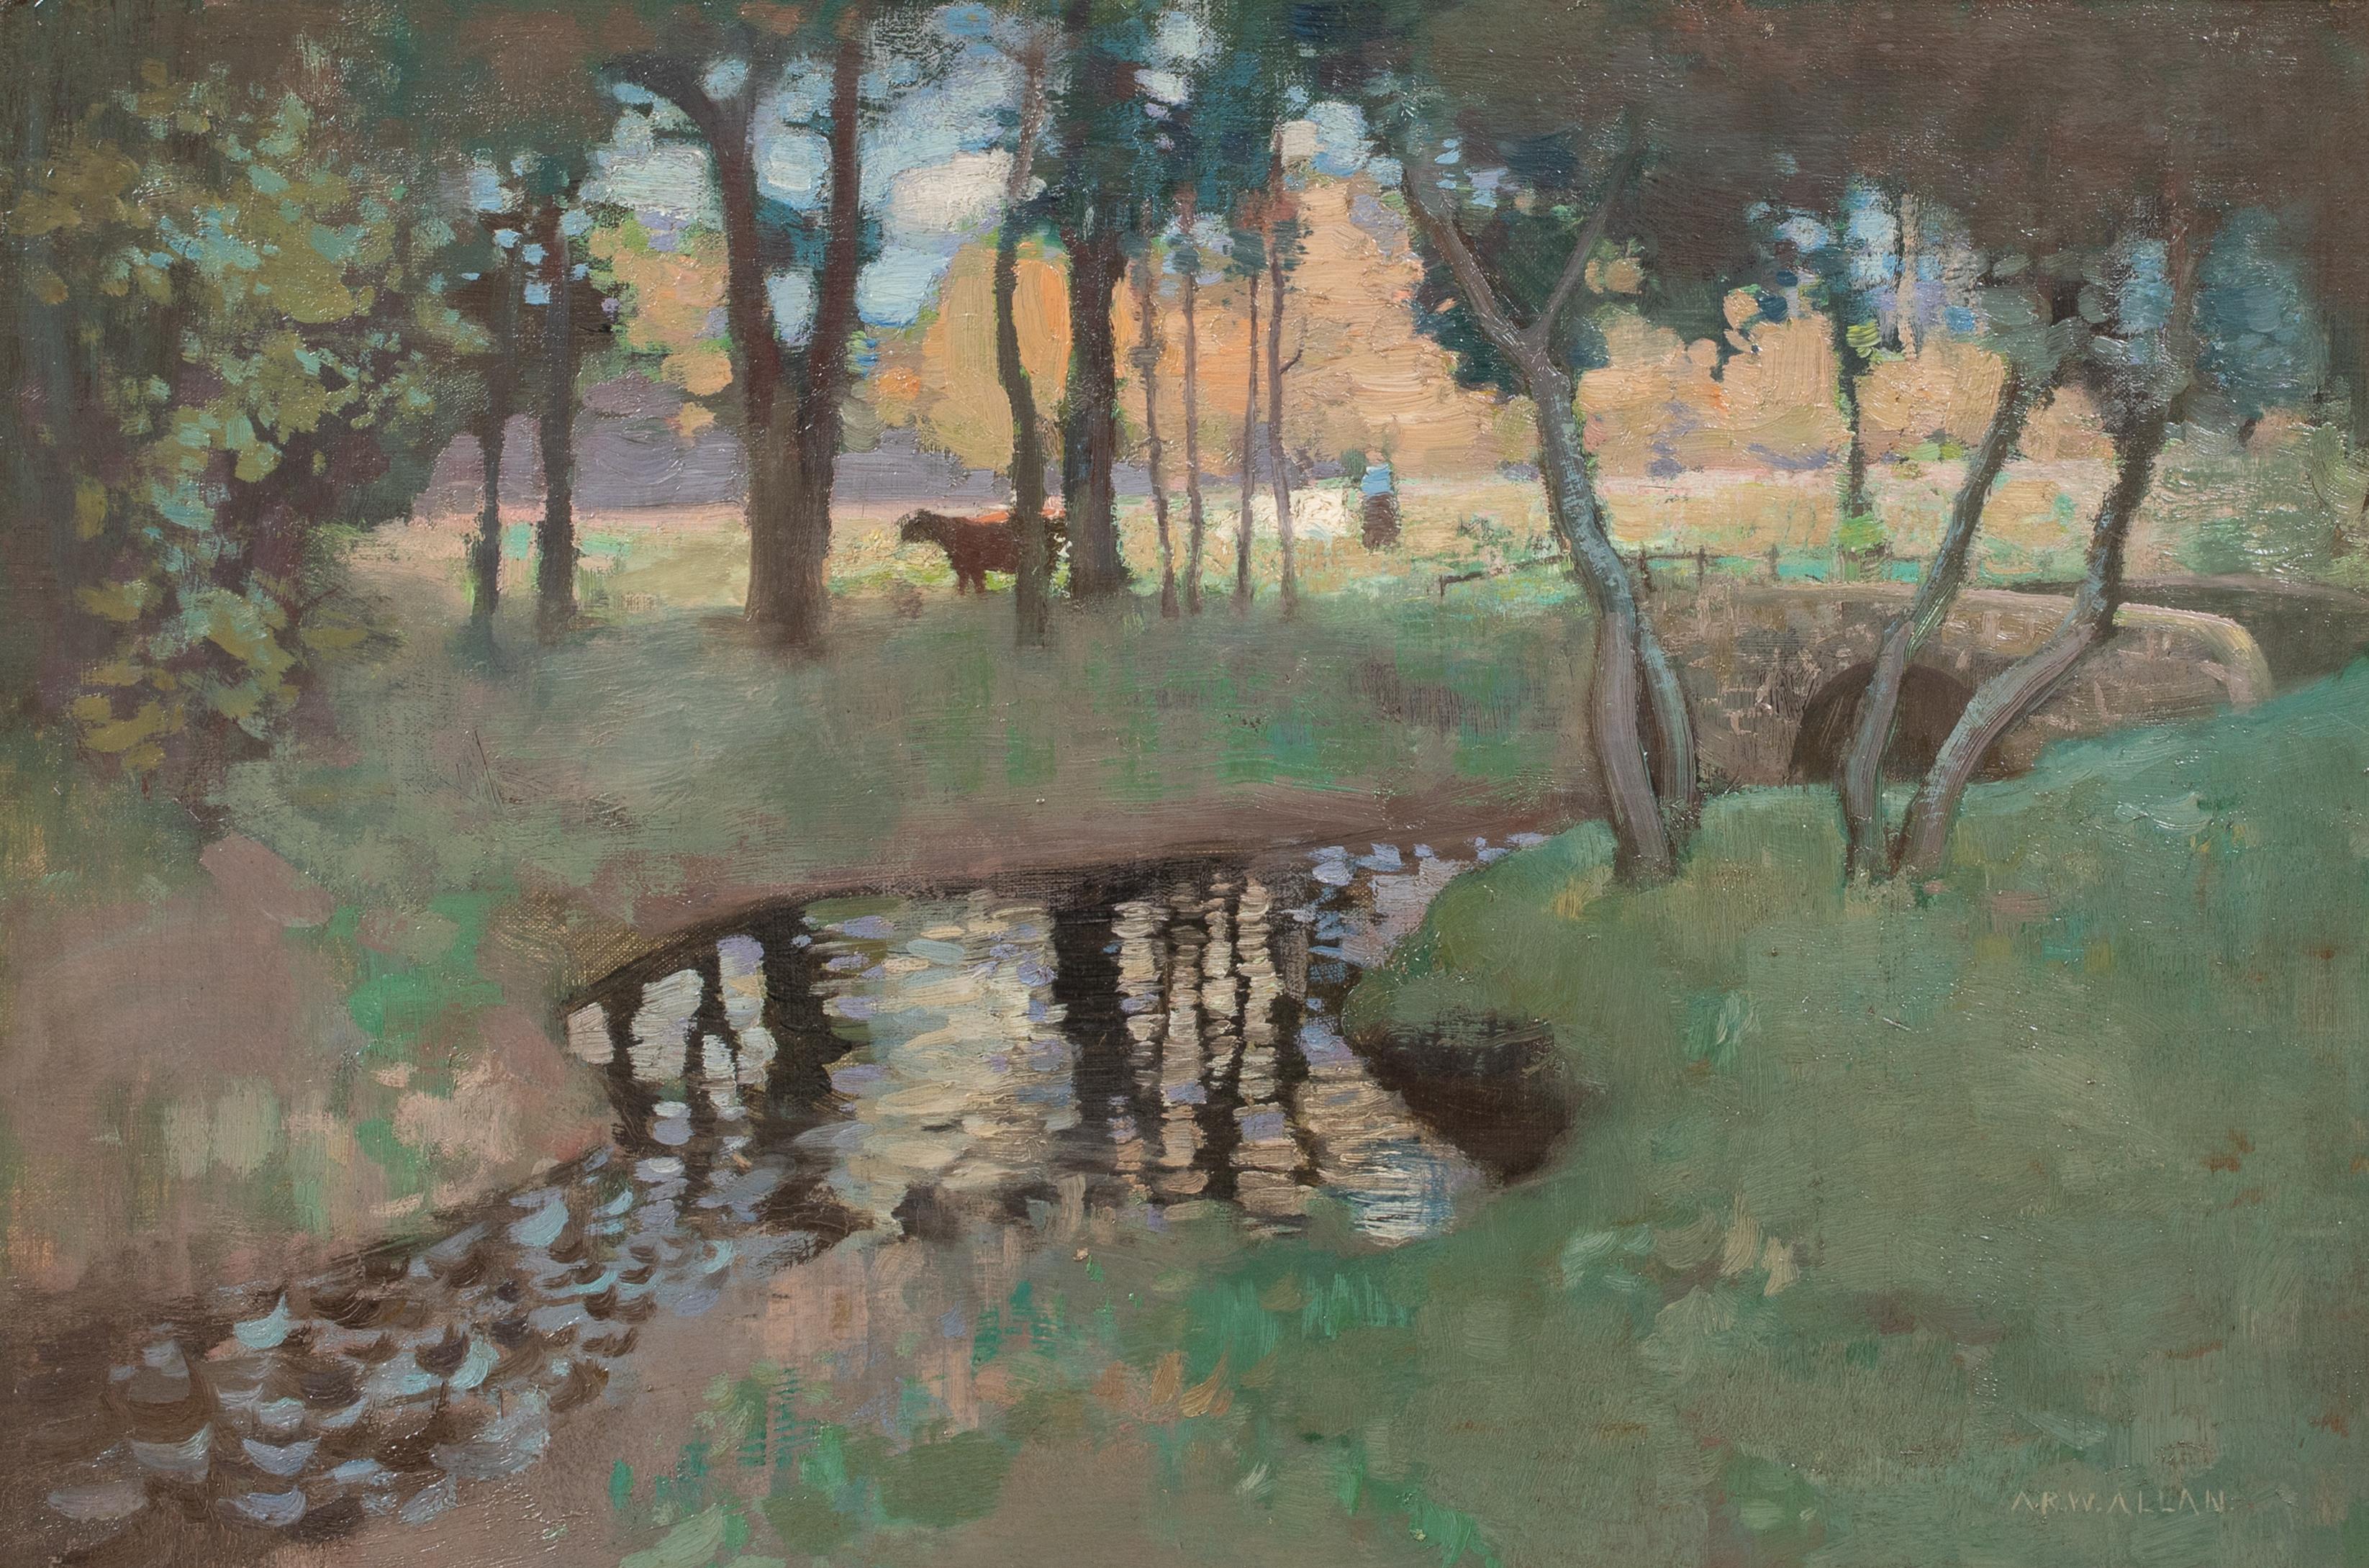 The Stream, Newhouse, North Lanarkshire, 19th Century 

by Archibald Russell Watson Allan (1878-1959) sales to $20,000

Large 19th Century view of a woodland stream, Newhouse, North Lanarkshire, oil on canvas by Archibald Allan. Excellent quality